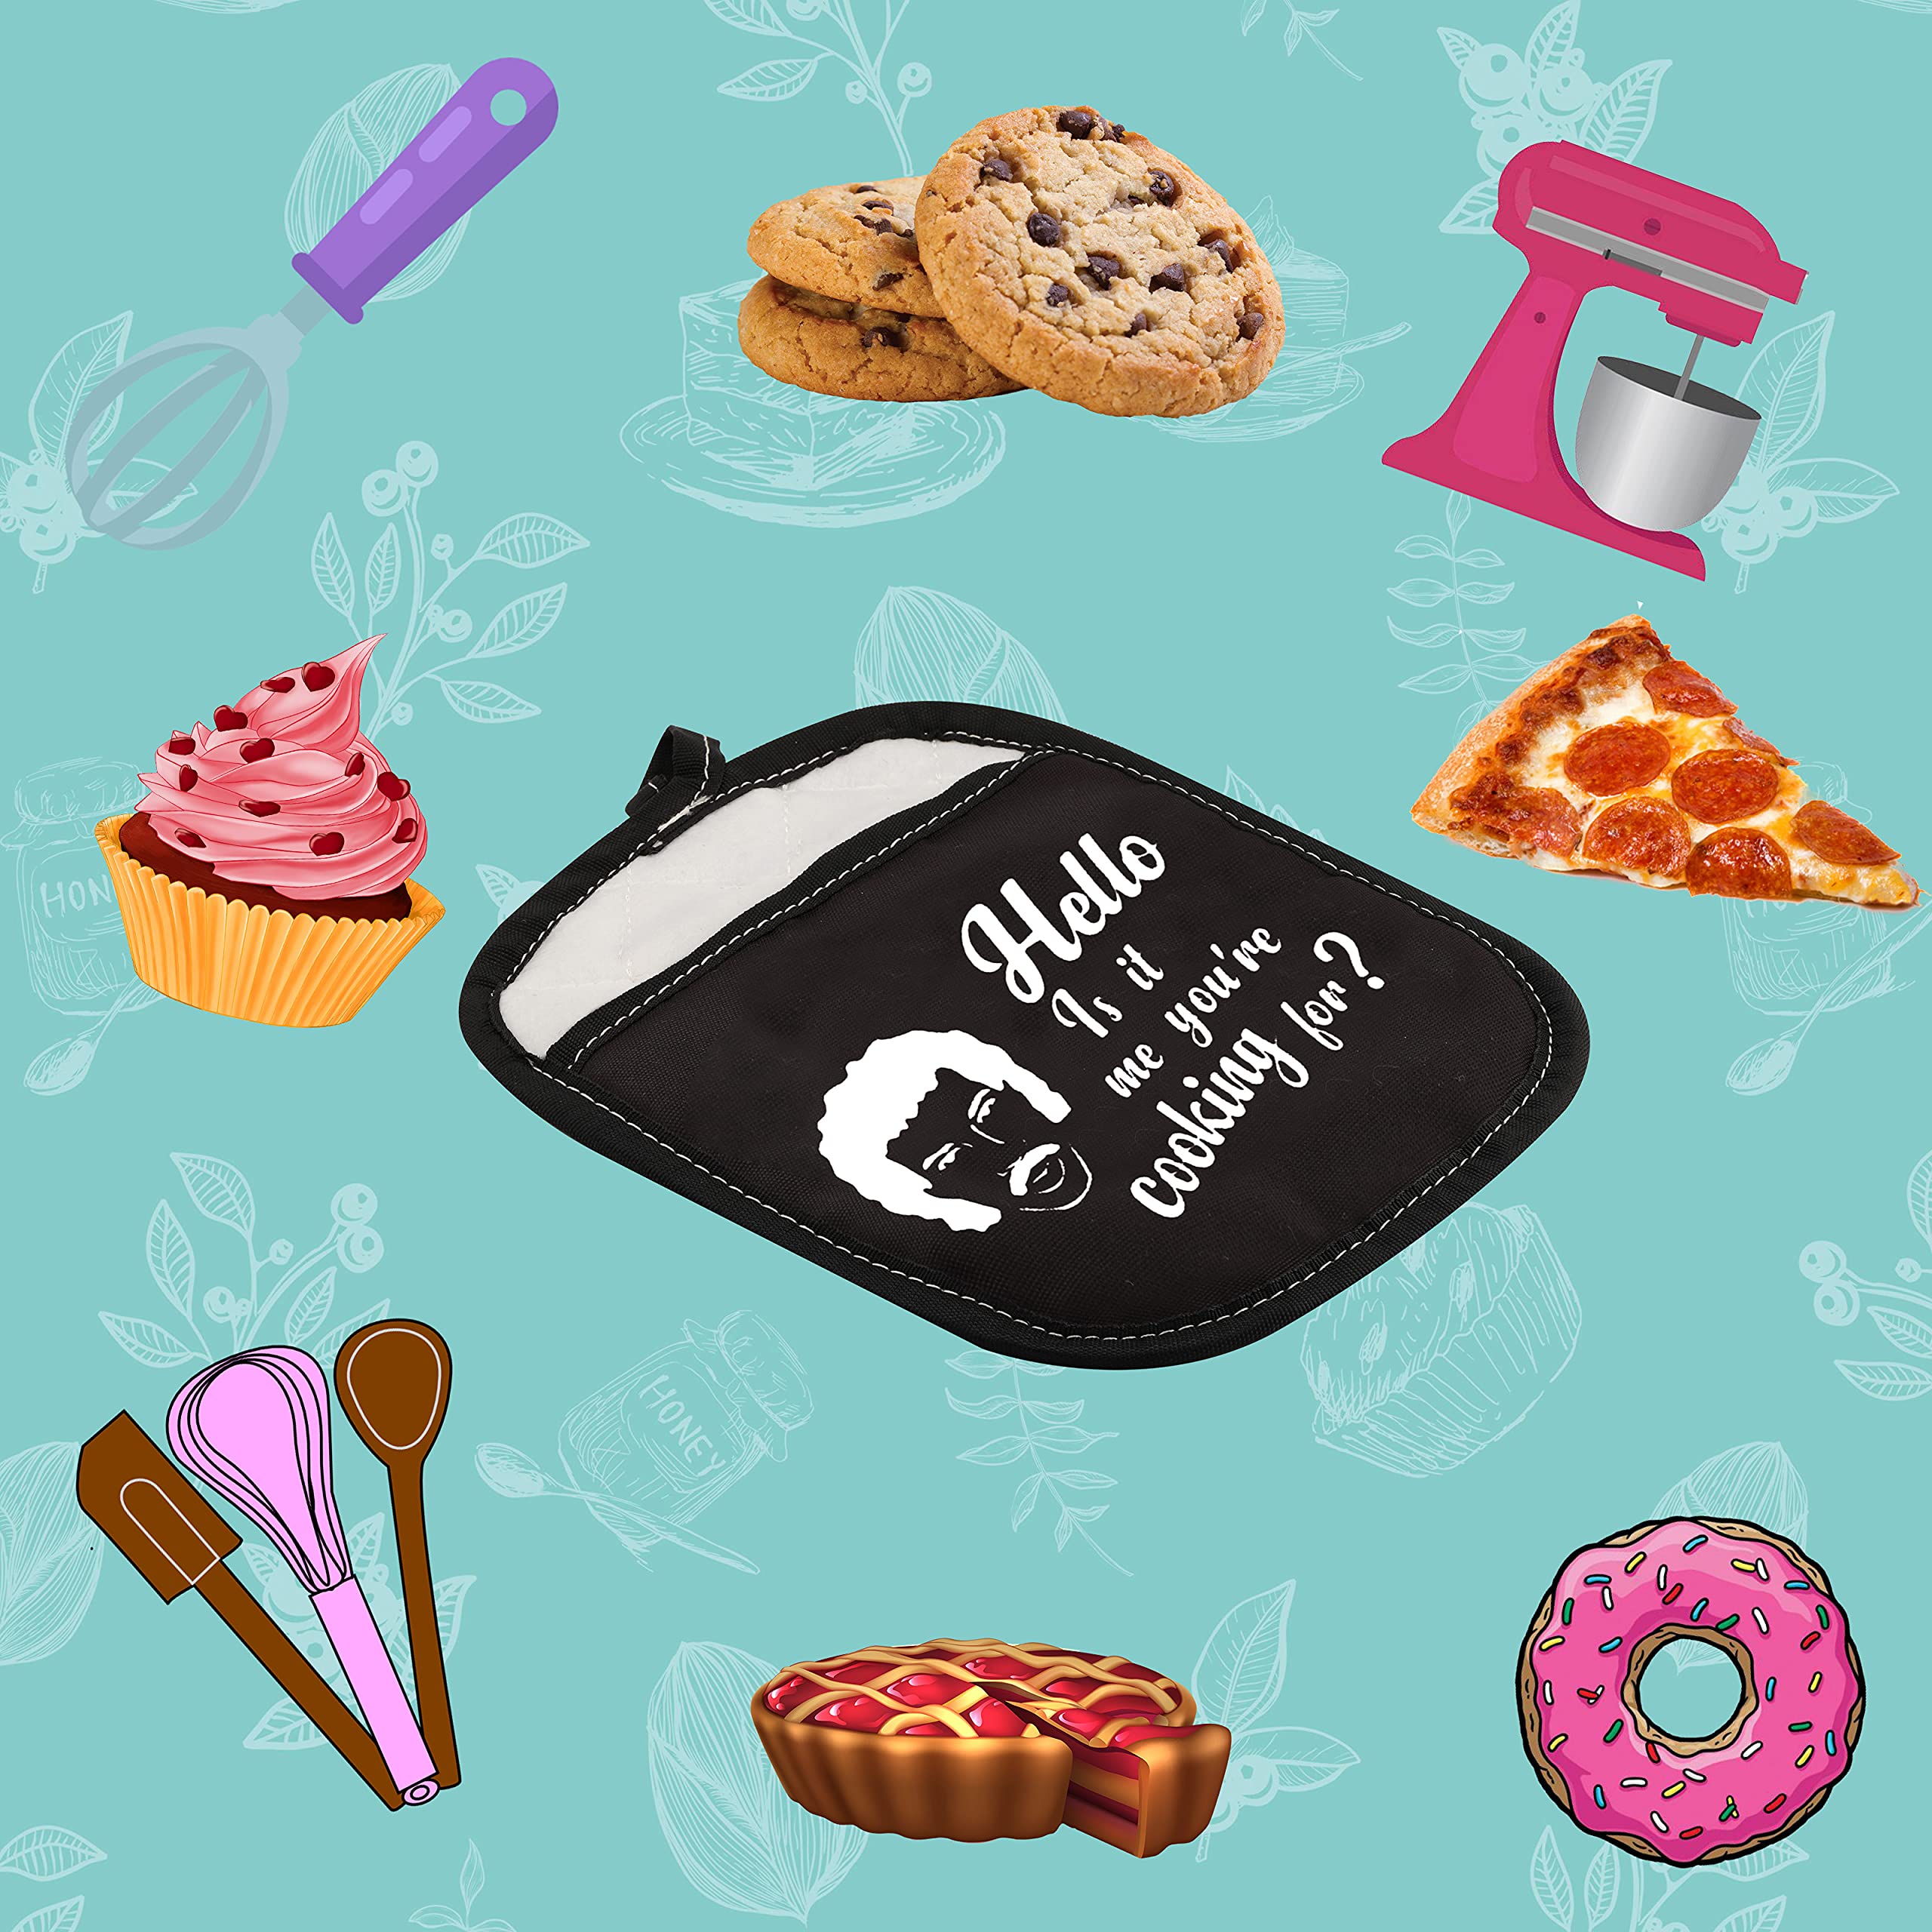 Novelty Inspired Baker Gift Hello is It Me You’re Cooking for Oven Pads Pot Holder with Pocket (You're Cooking for)